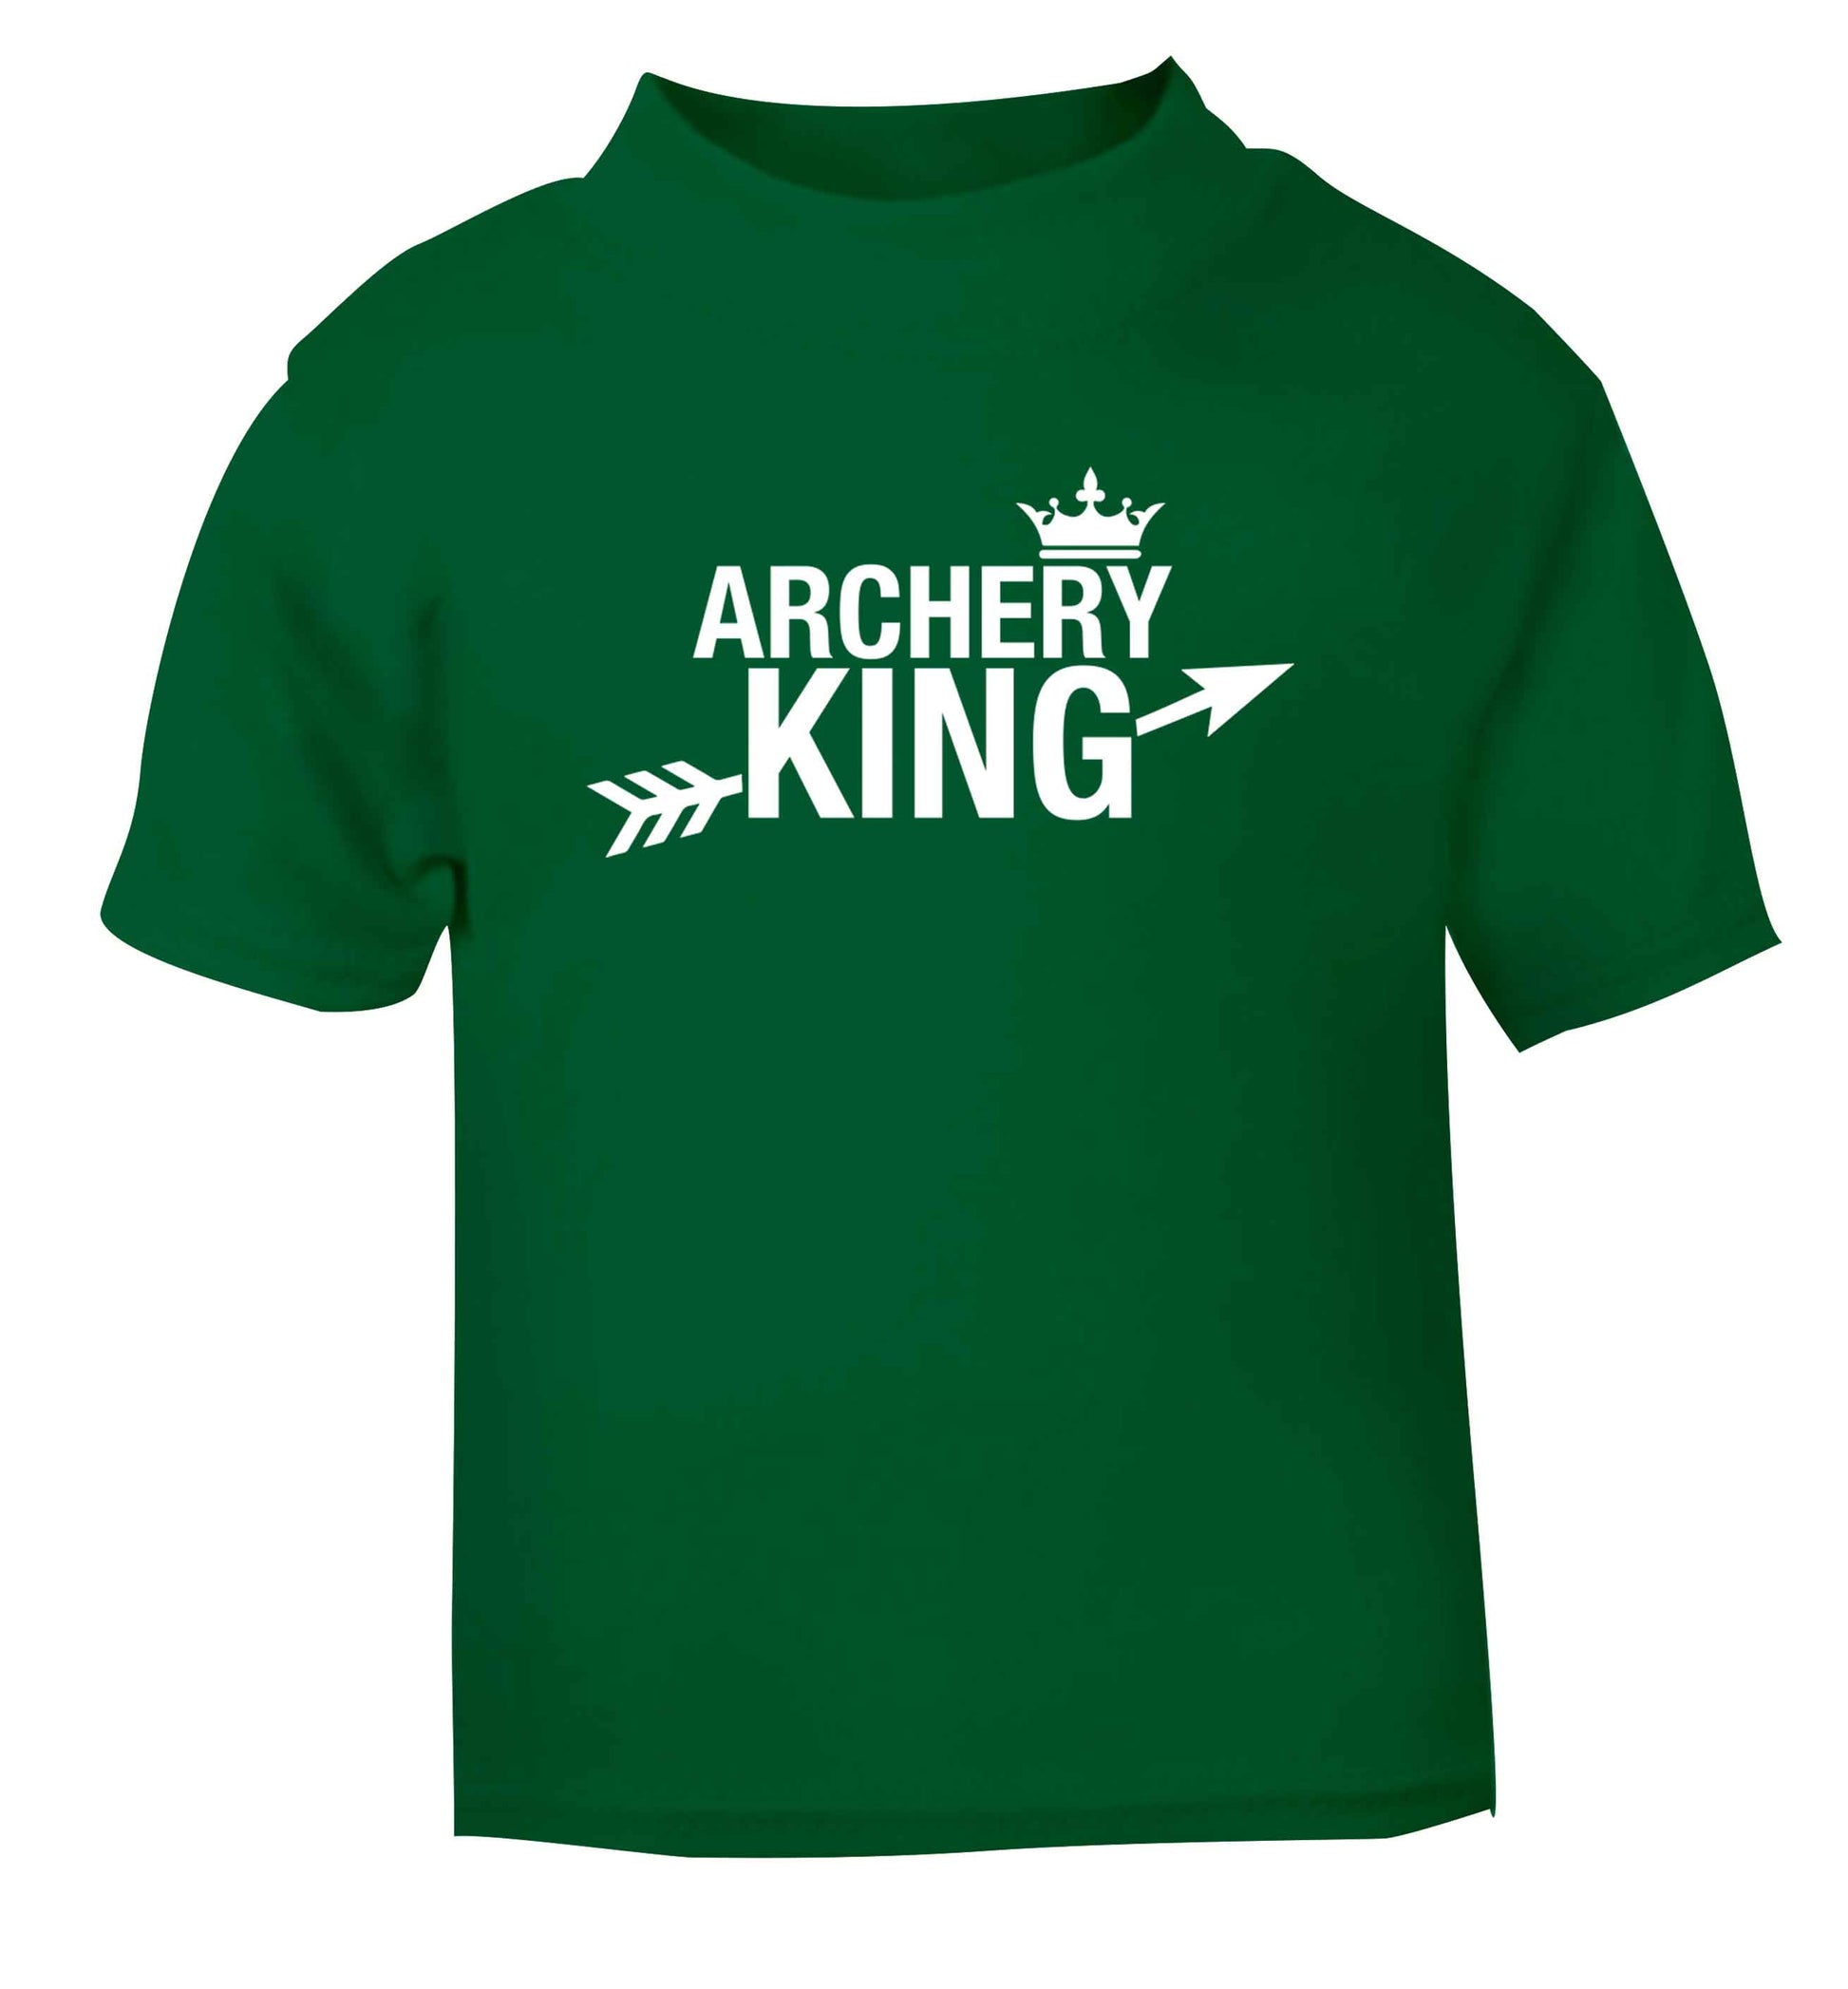 Archery king green Baby Toddler Tshirt 2 Years